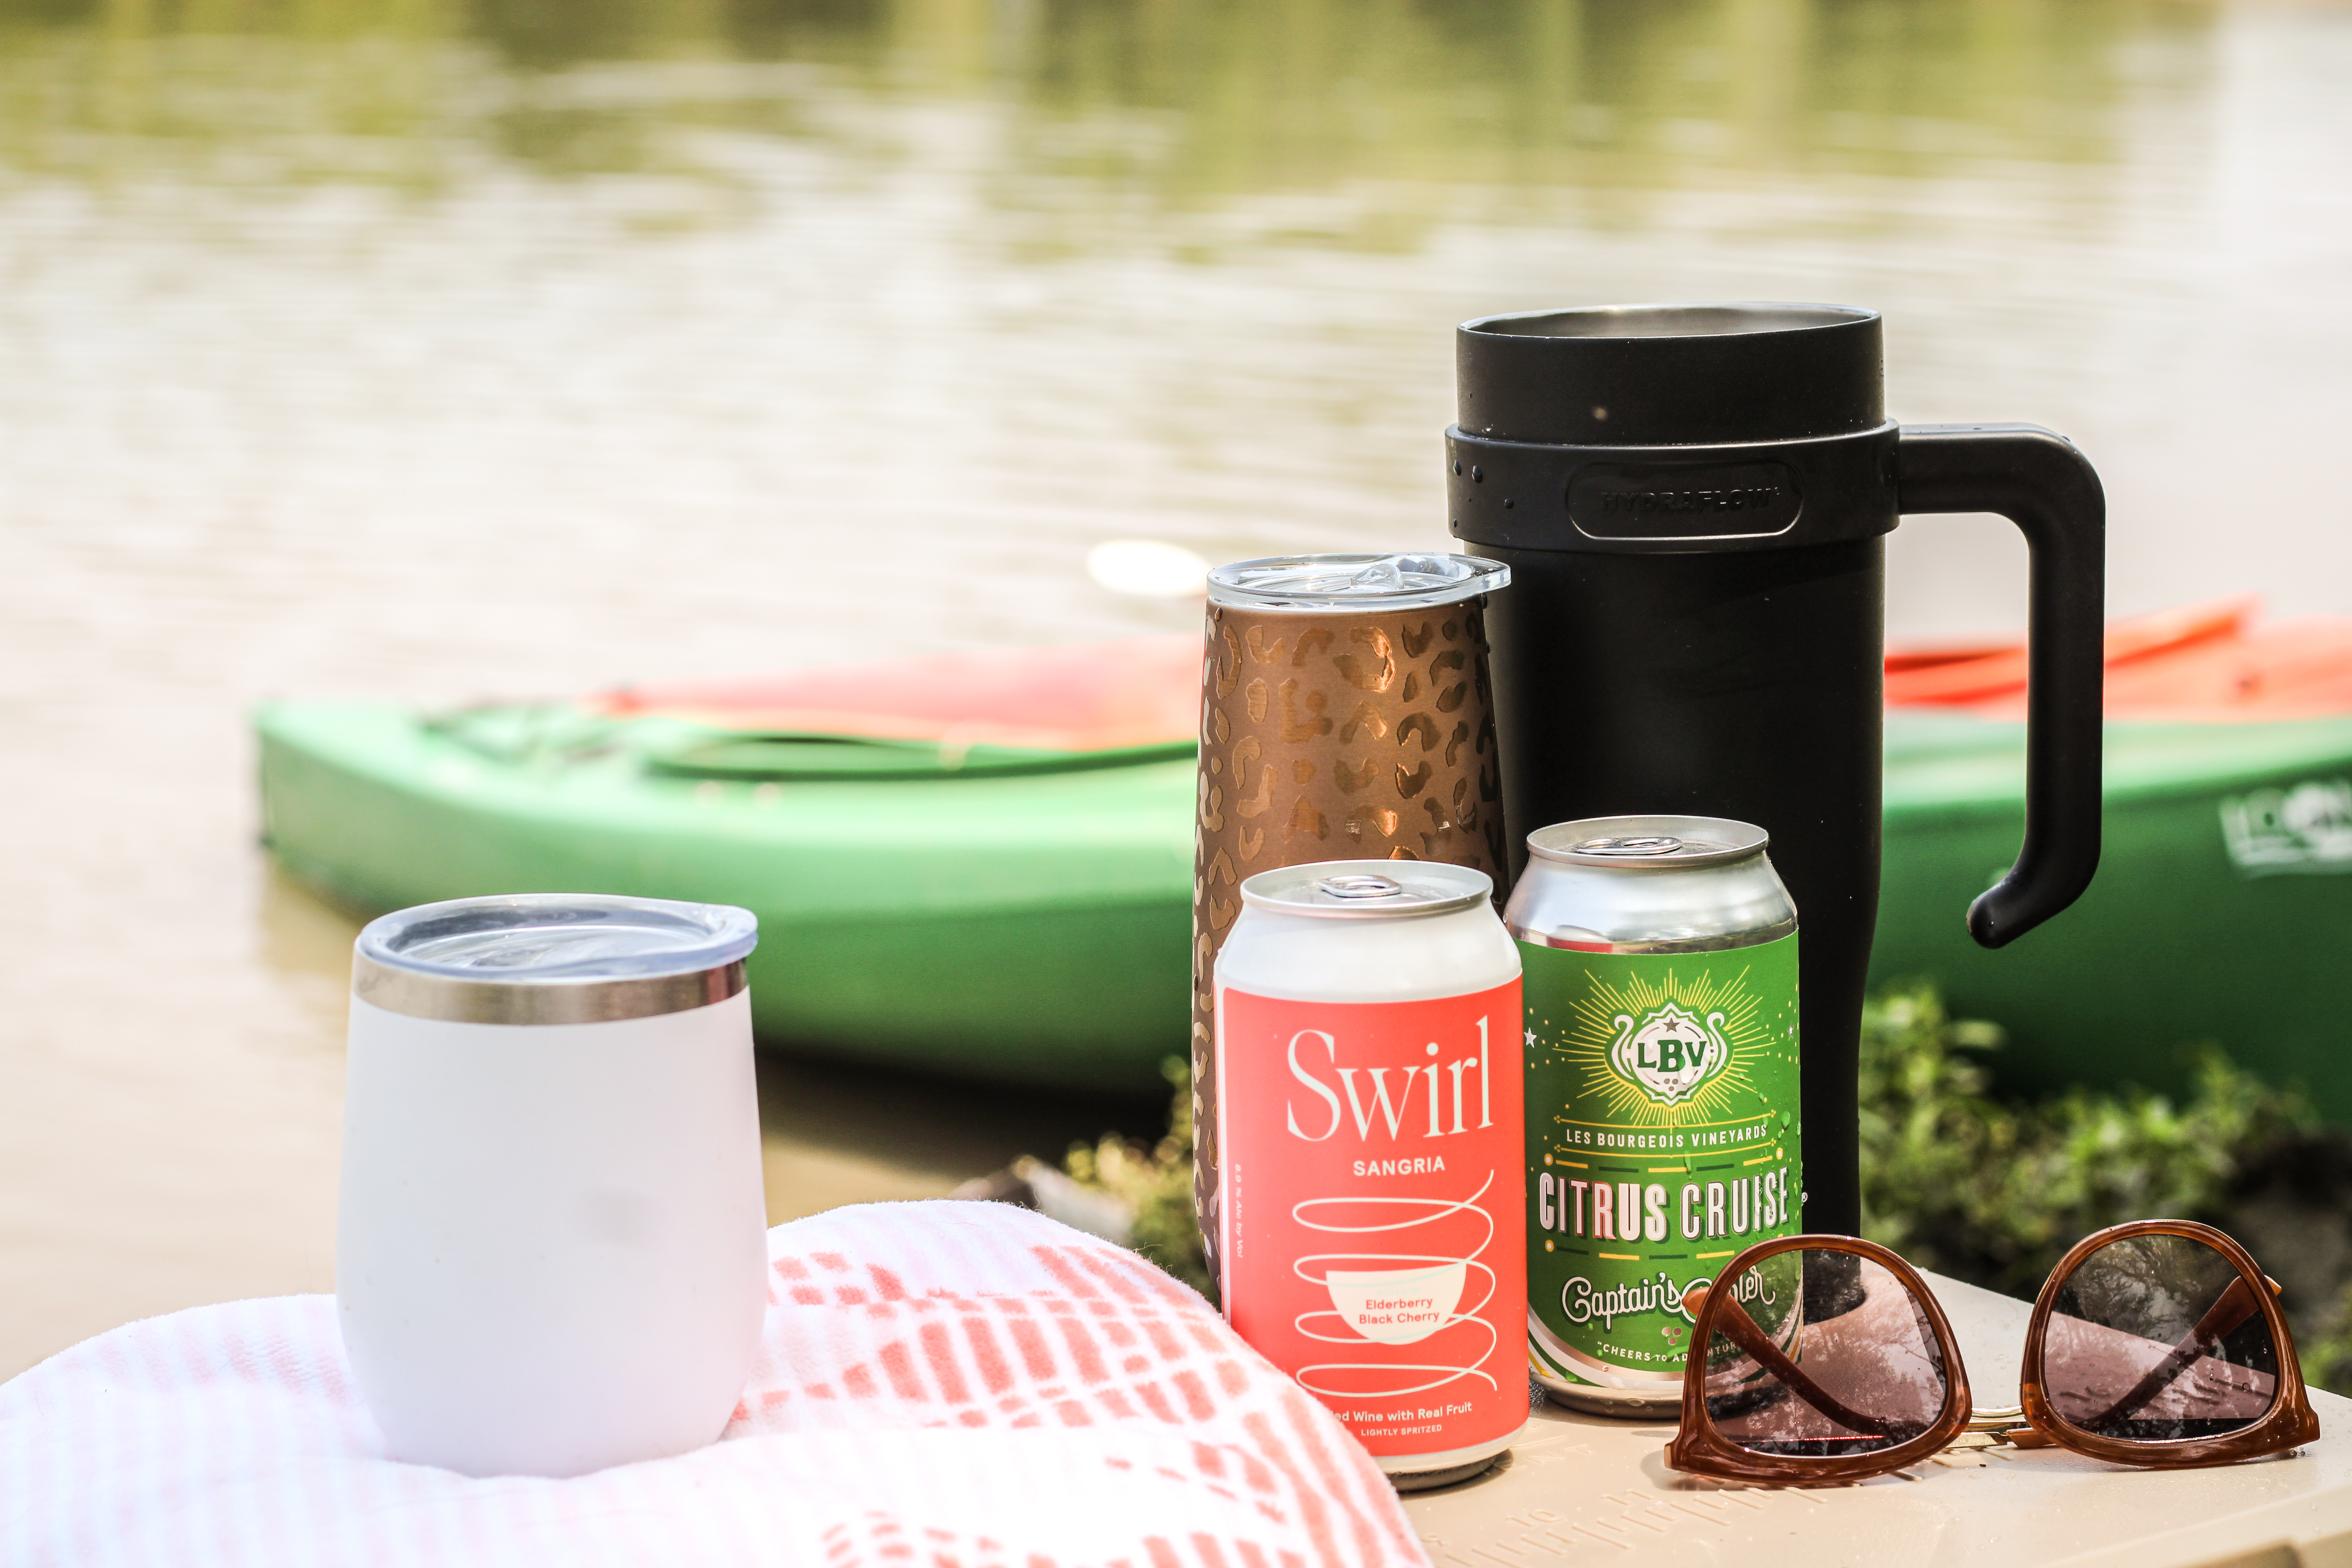 Boat with wine cans and tumblers